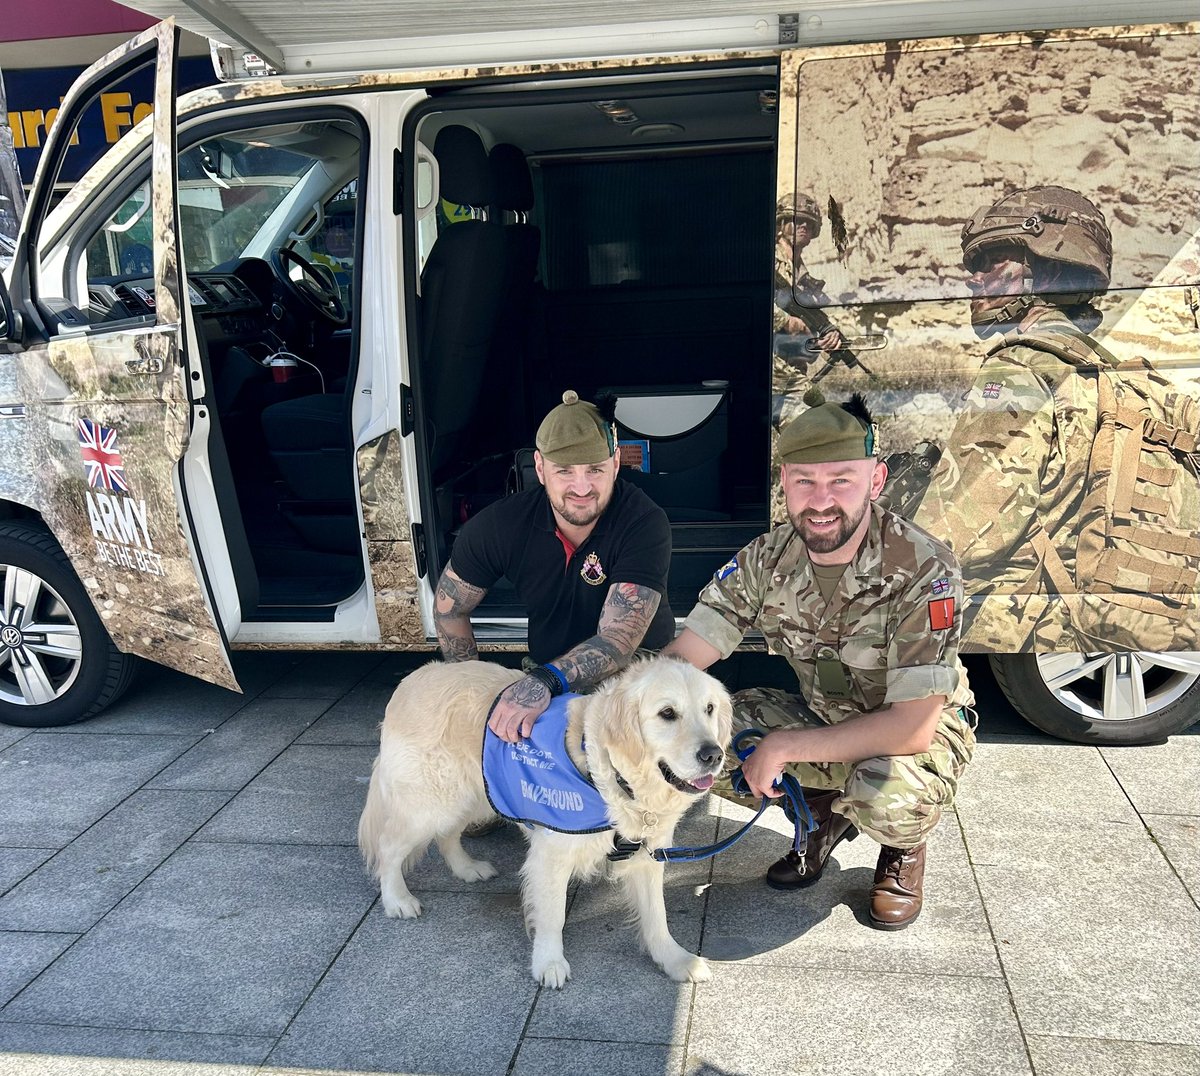 Met two butch #soldiers who became big softies and gave me lots of cuddles. Veteran allows this for fellow #army folk - but not for the #navy or #RAF - we have standards!! Please join me in thanking them for their service.